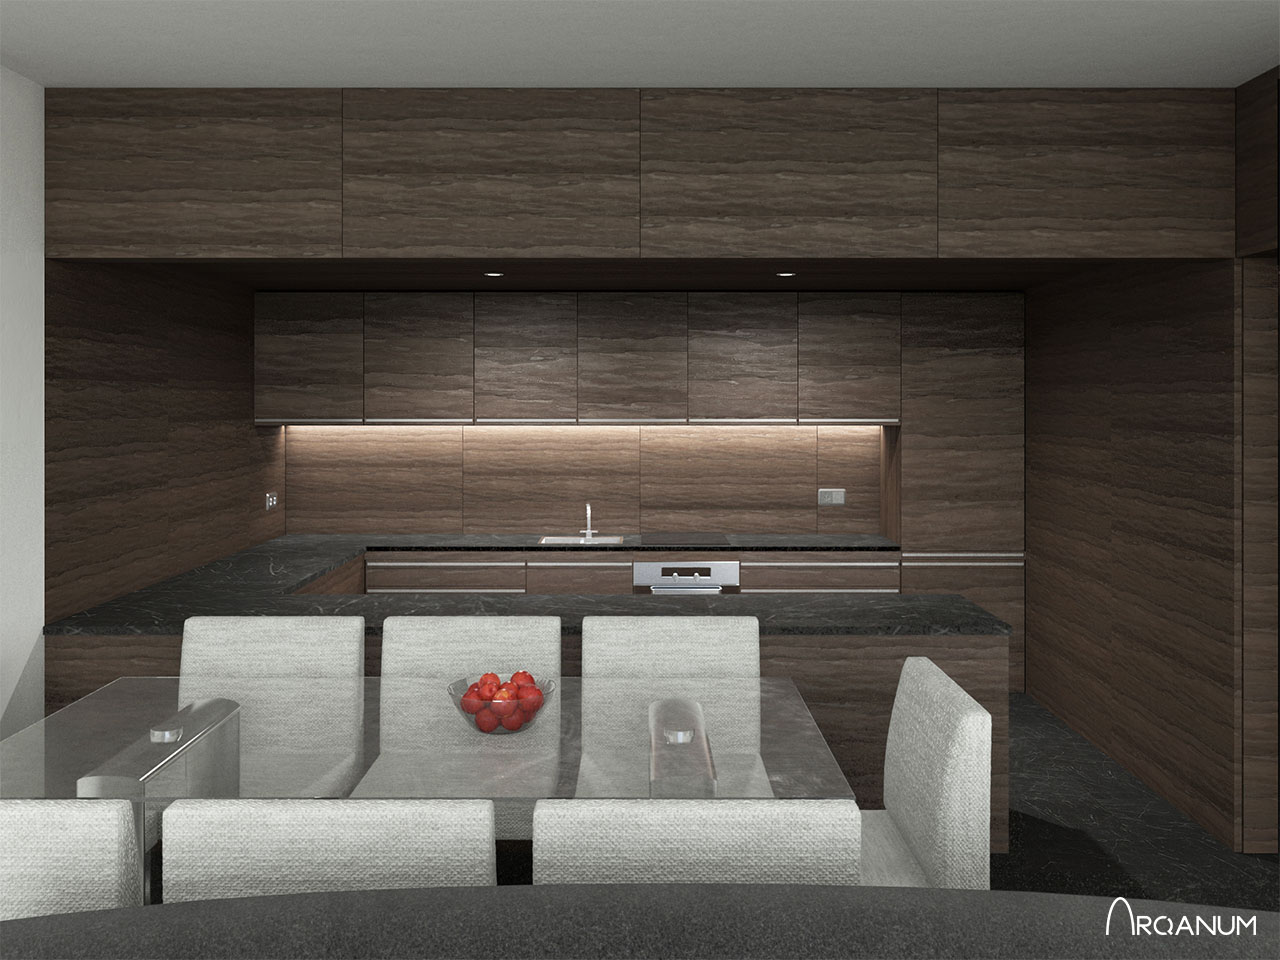 Residential Building in Alicante, kitchen